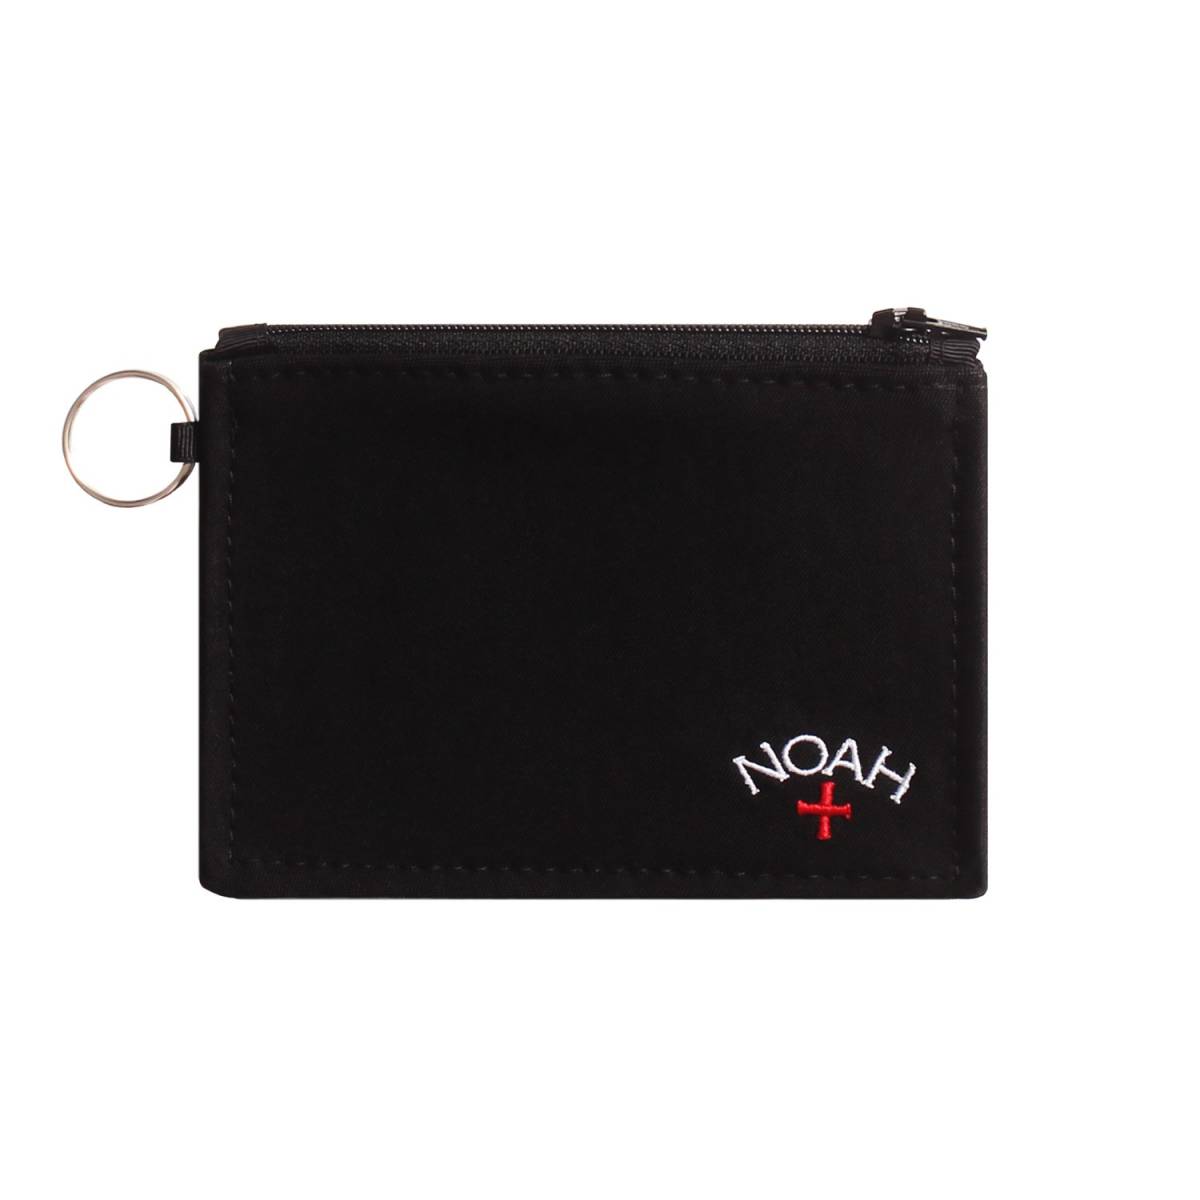 NOAH NYC ノア 2020SS Water Resistant Pouch - Small - コインケース 小銭入れ 新品 完売品 希少即決 カードケース カード入れ ミニポーチ